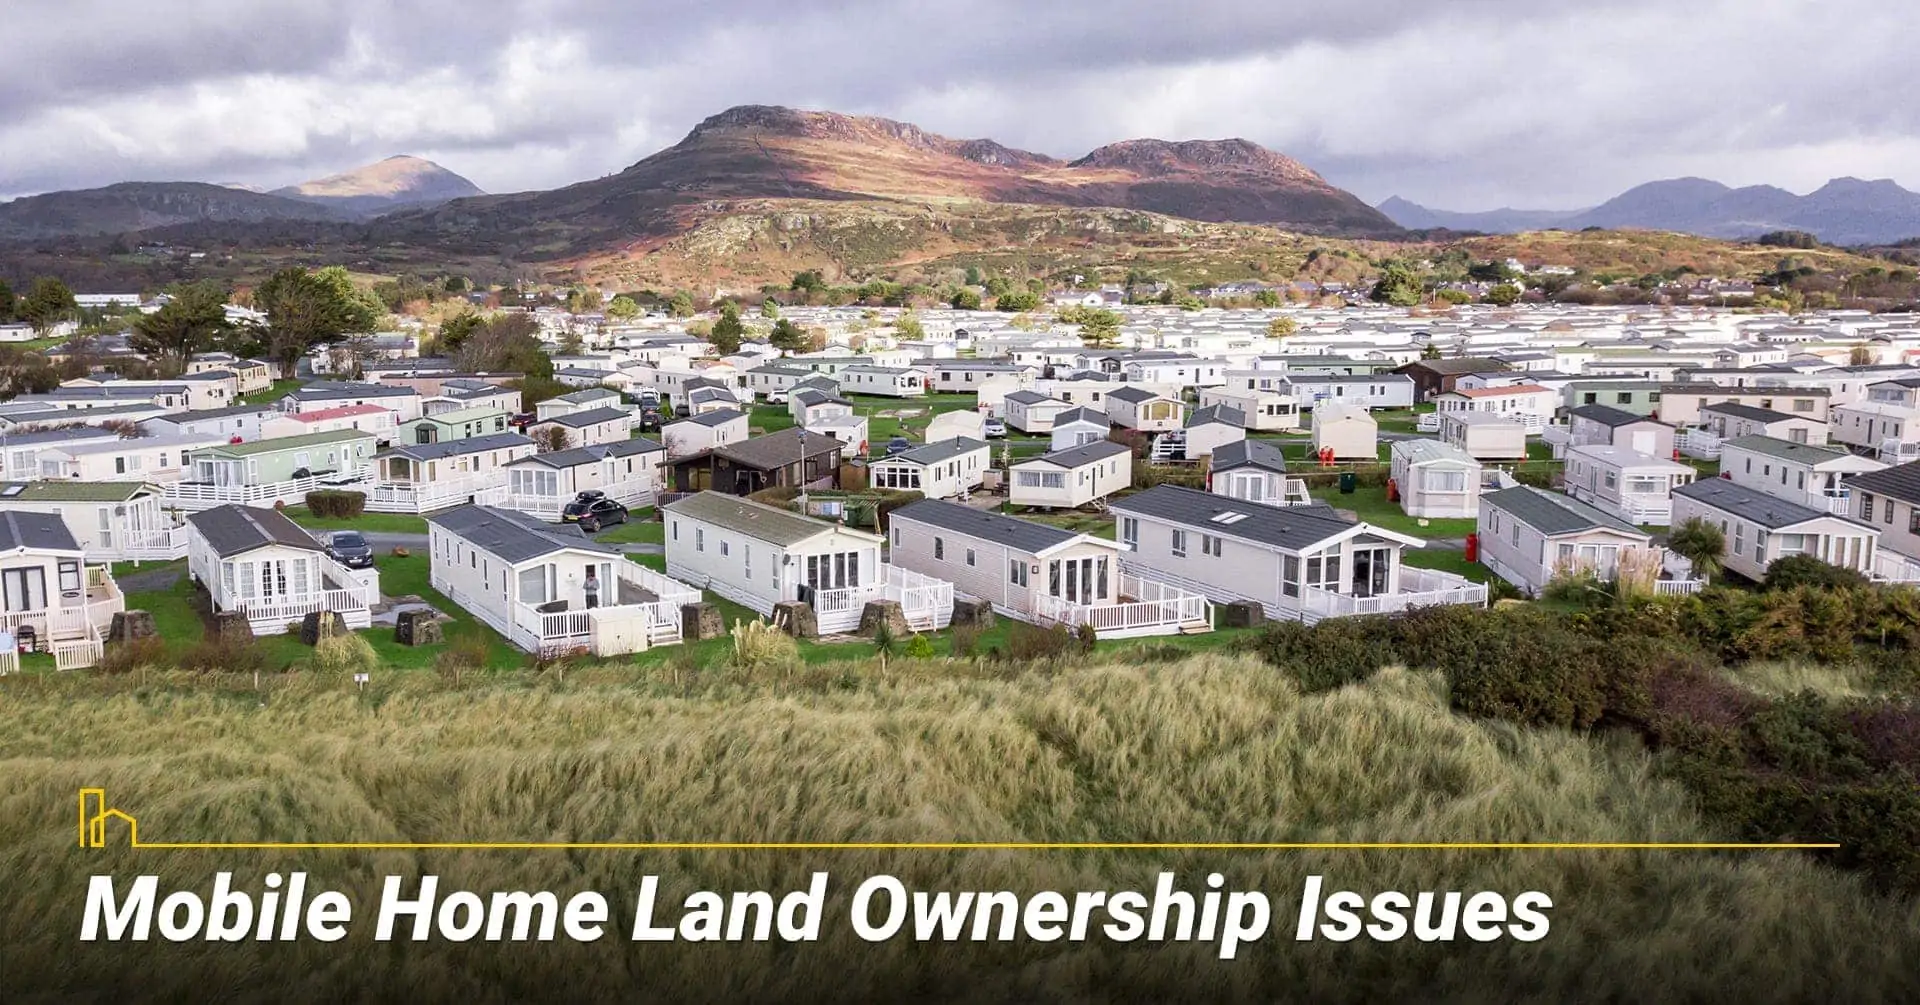 Mobile Home Land Ownership Issues, owning land on mobile home